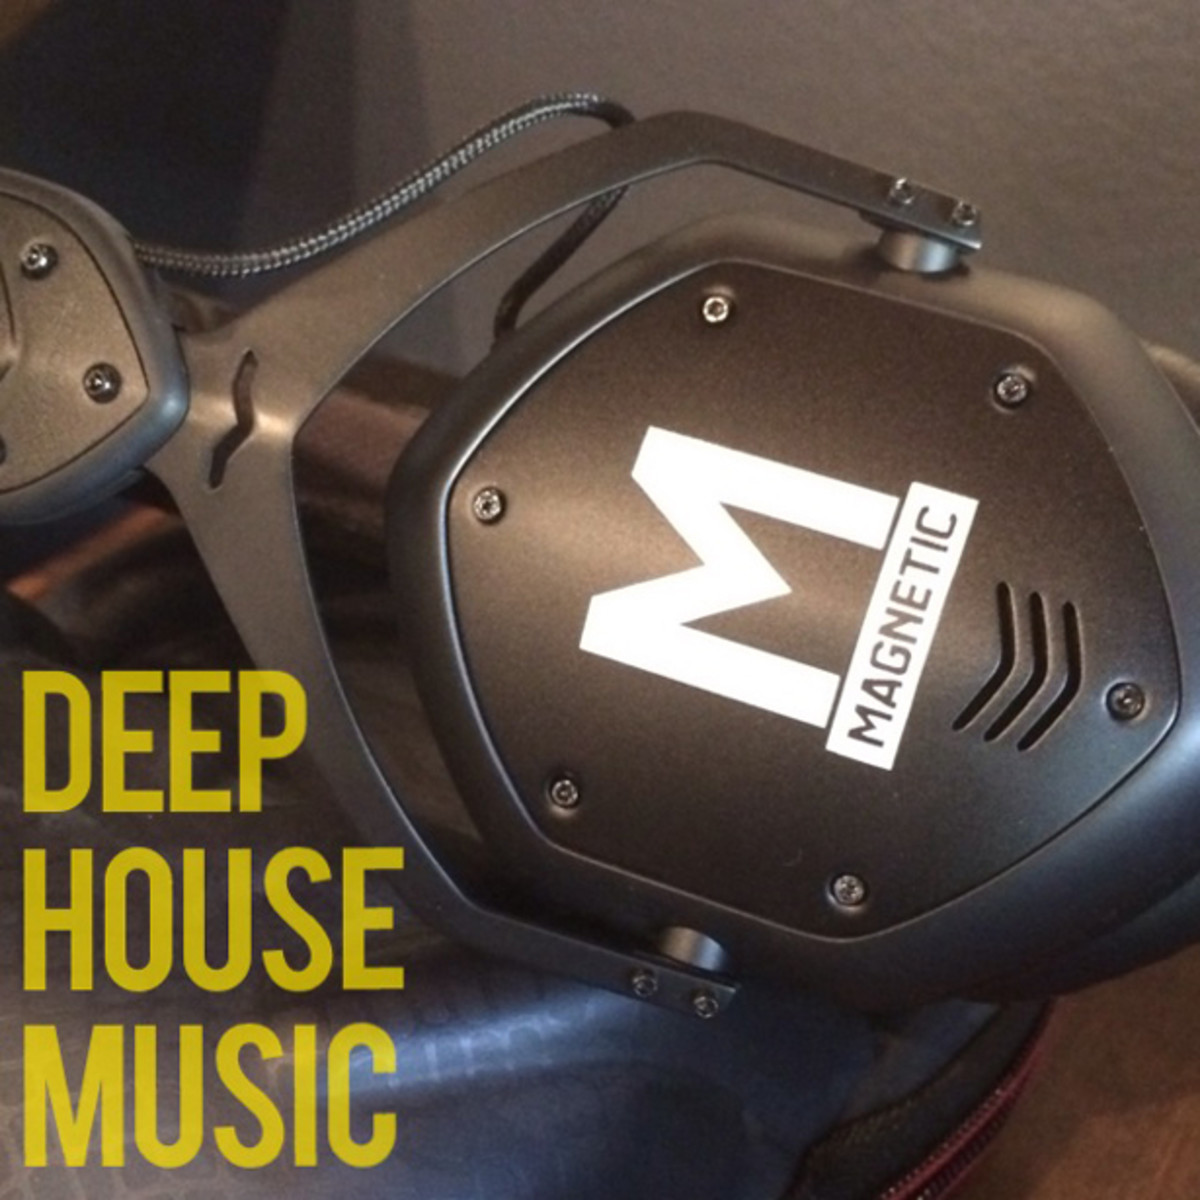 Magnetic Podcast: DEEPHOUSEMUSIC - EDM Download